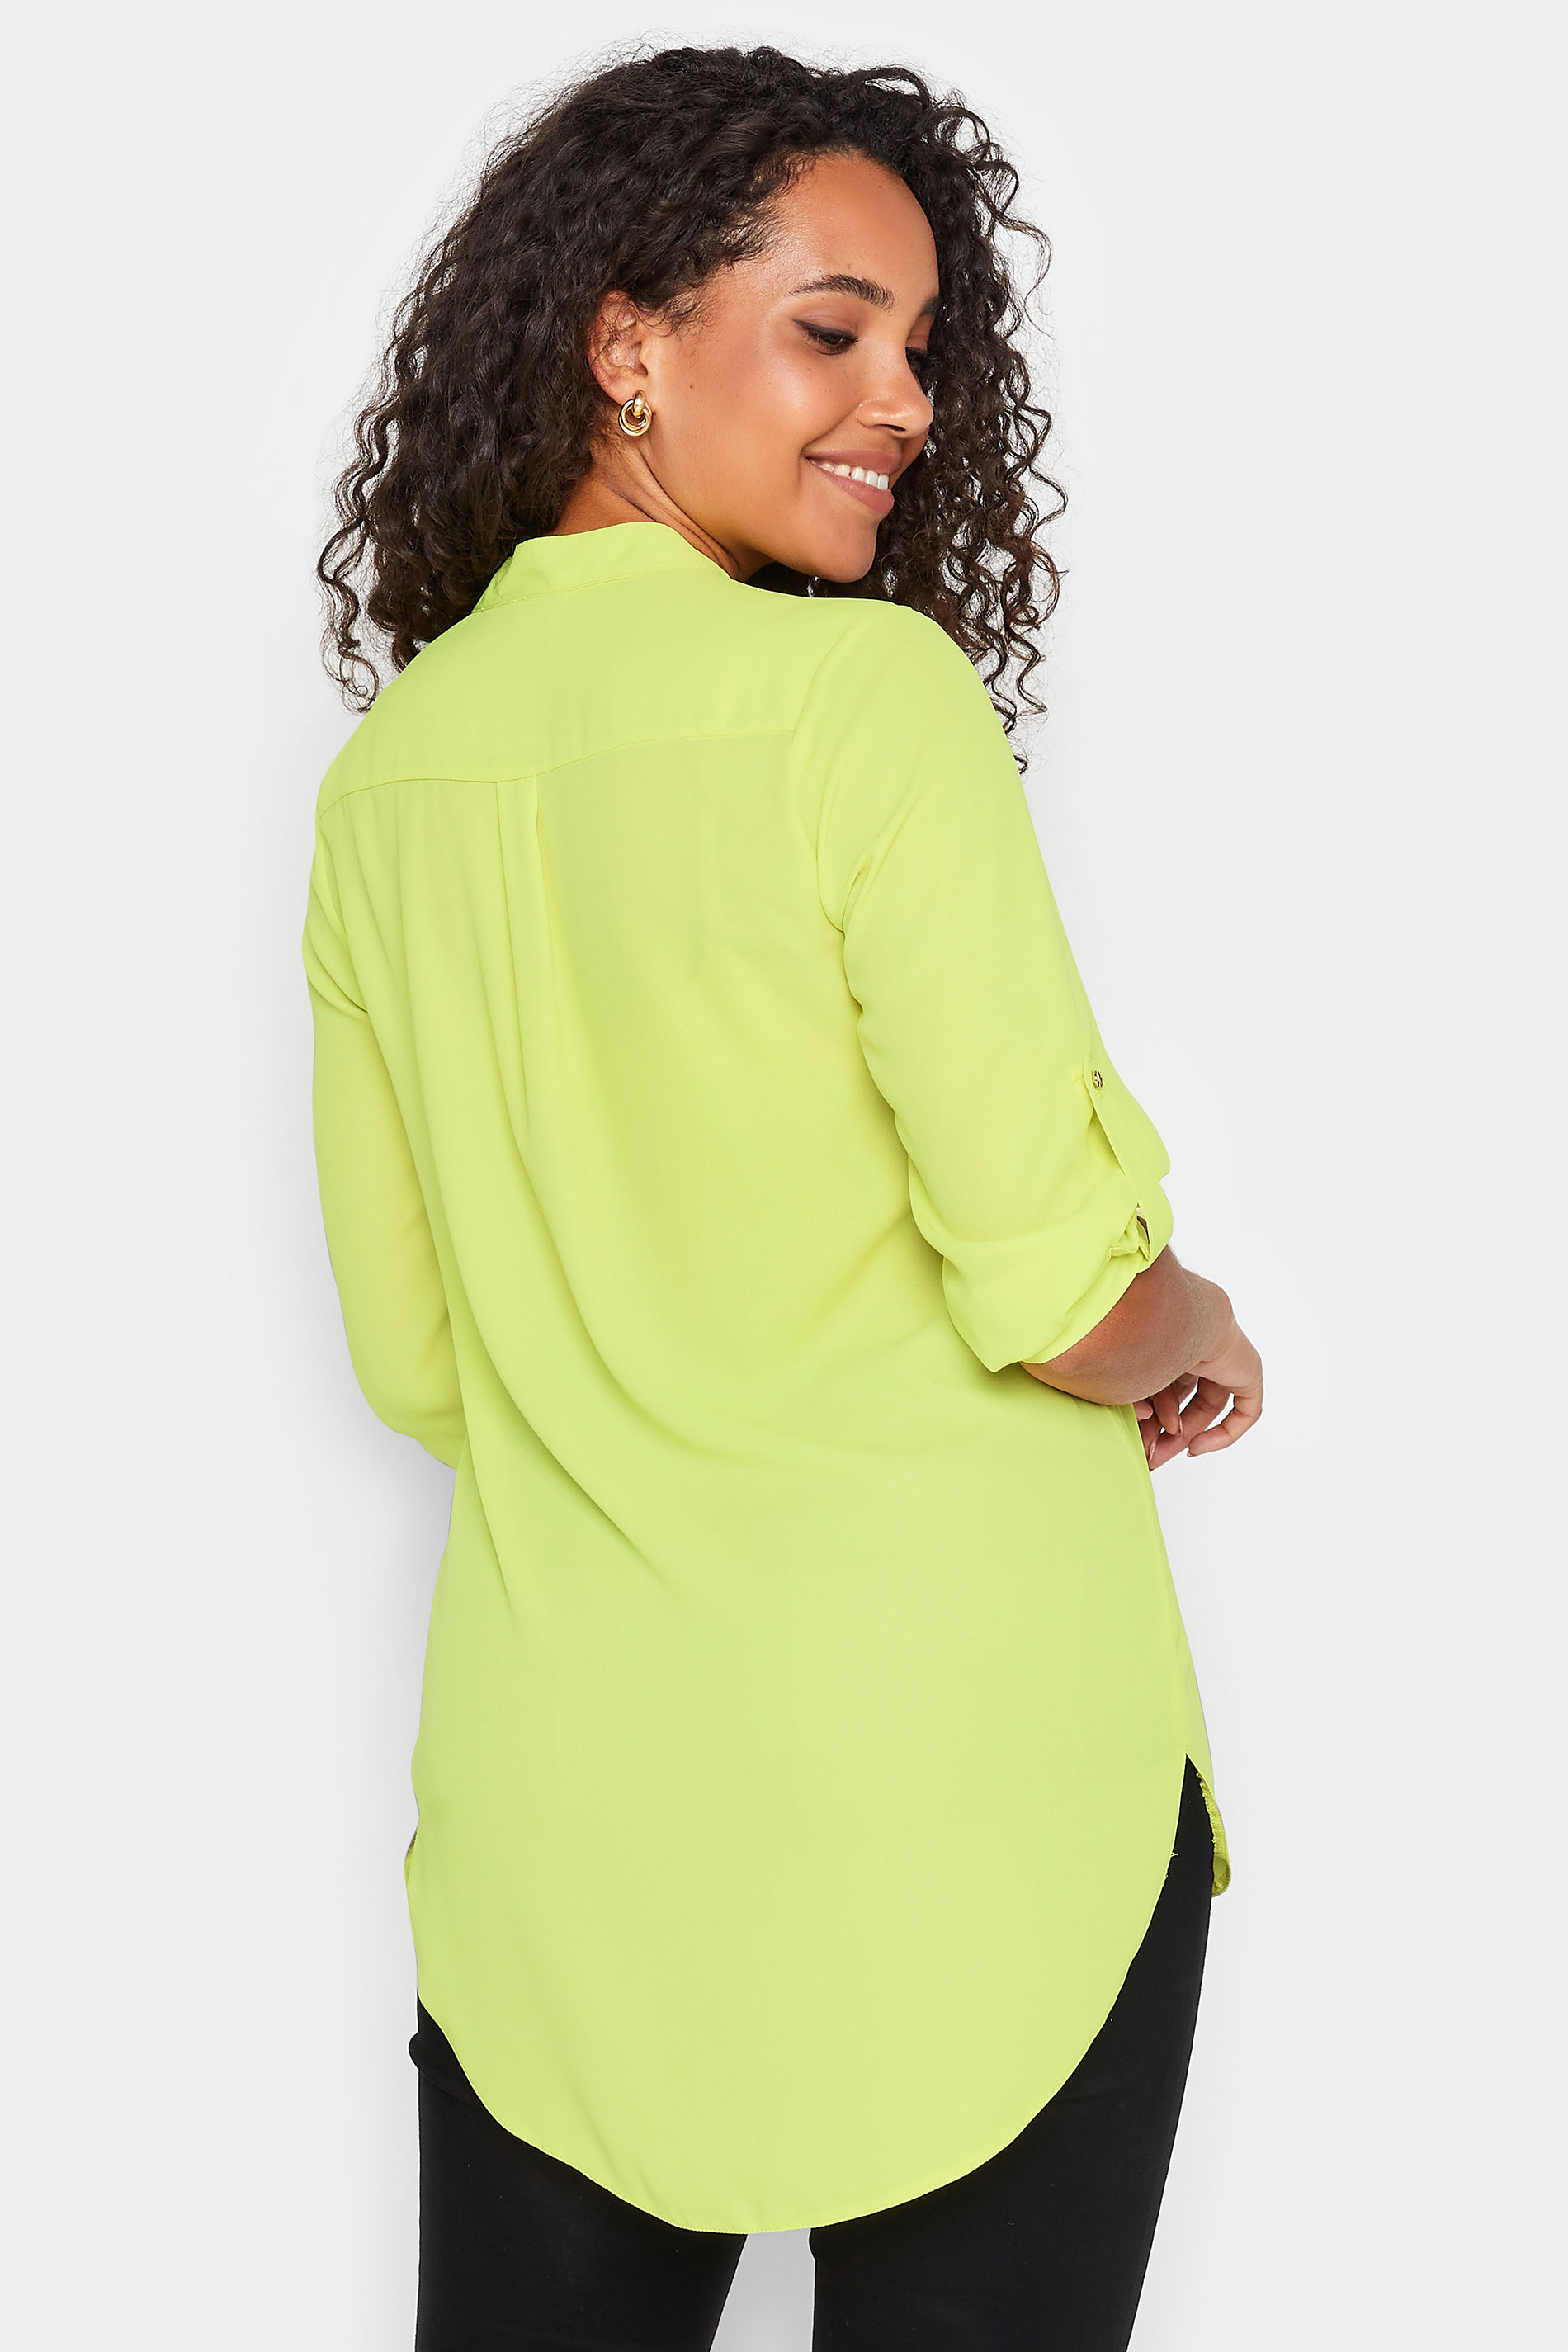 M&Co Green Tab Sleeve Blouse | M&Co 3